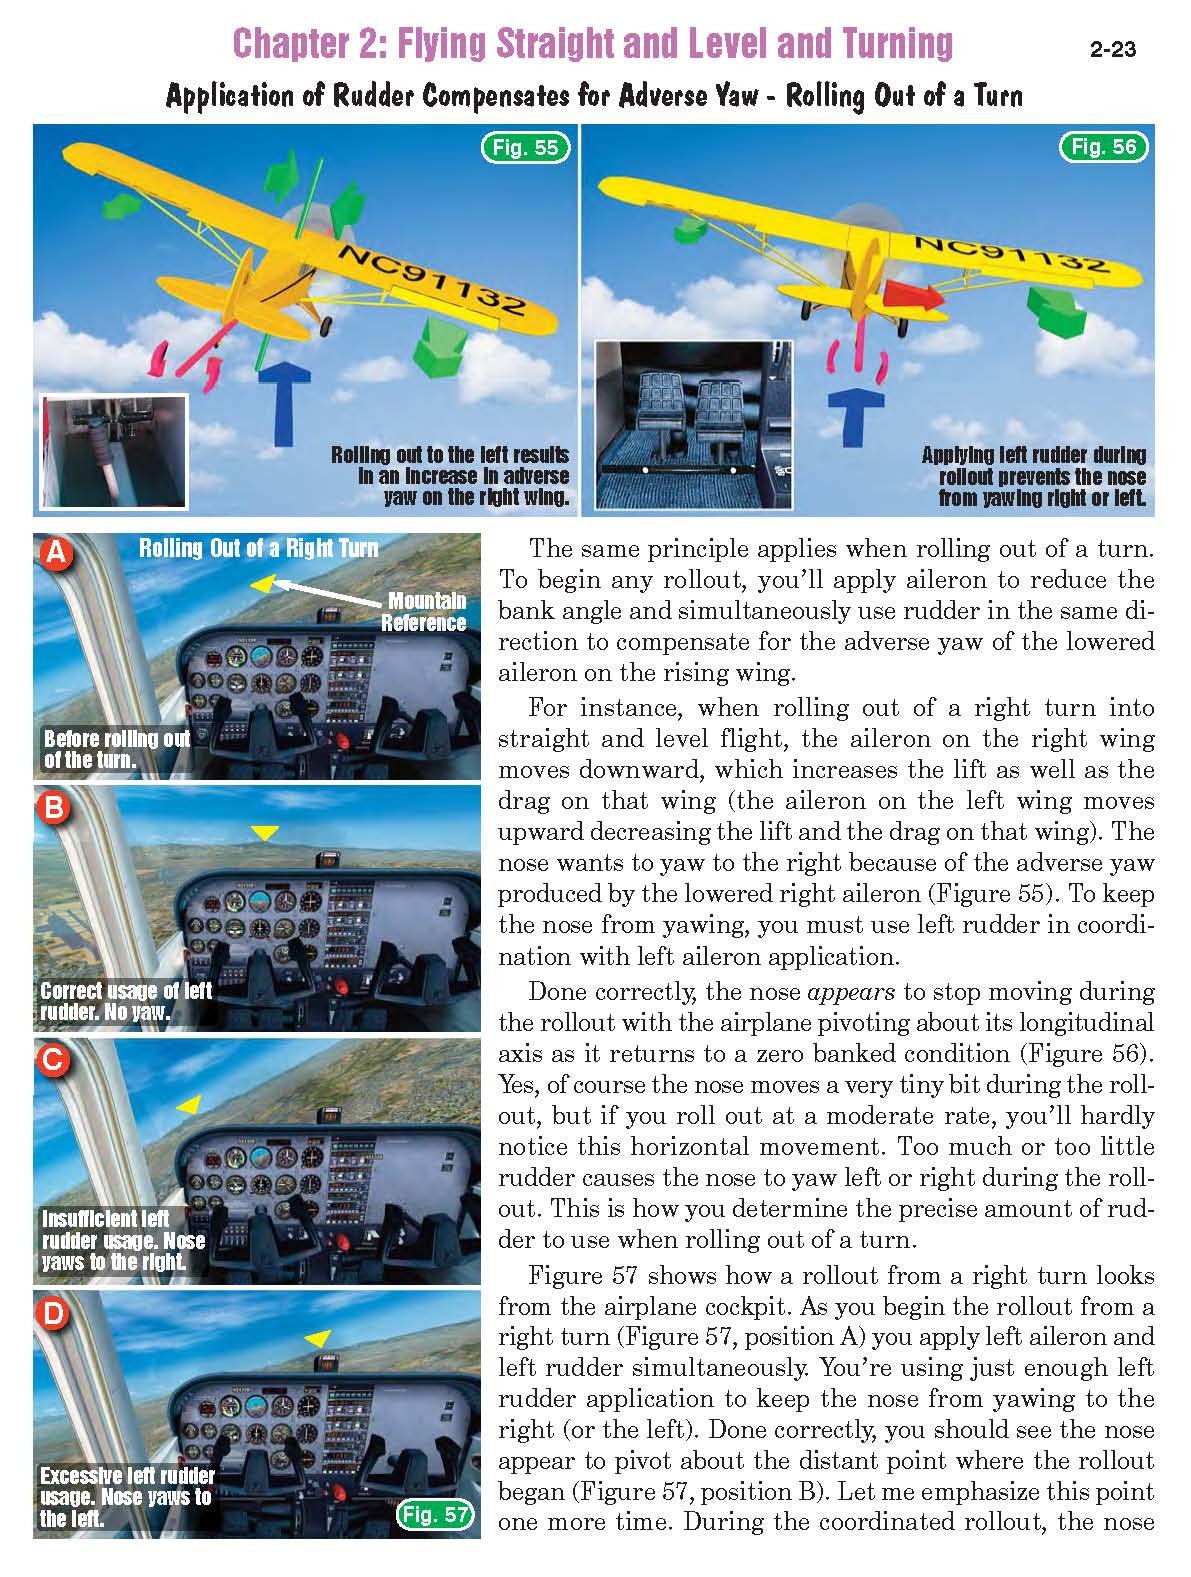 A magazine page showing Rod Machado's How to Fly an Airplane Handbook.